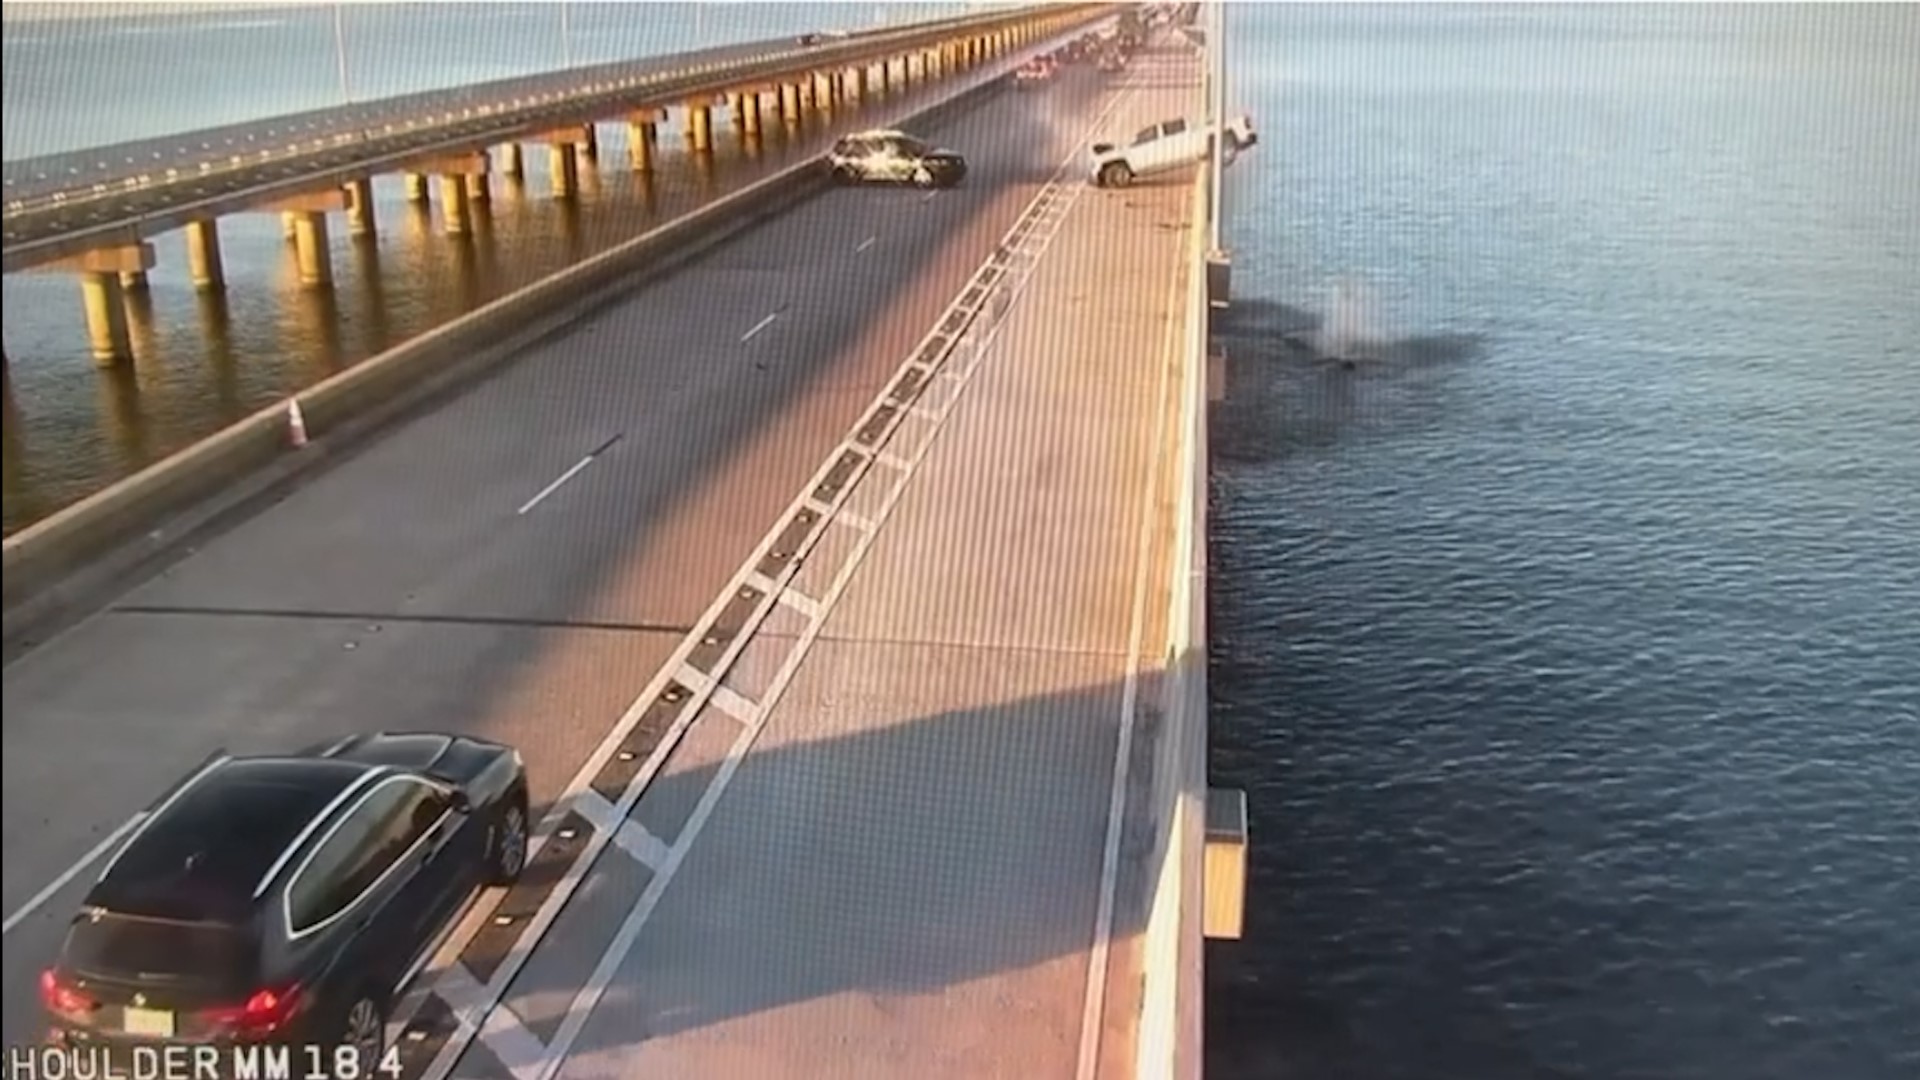 A spate of recent major accidents on the Lake Pontchartrain Causeway has bridge officials pleading with drivers to pay attention behind the wheel.